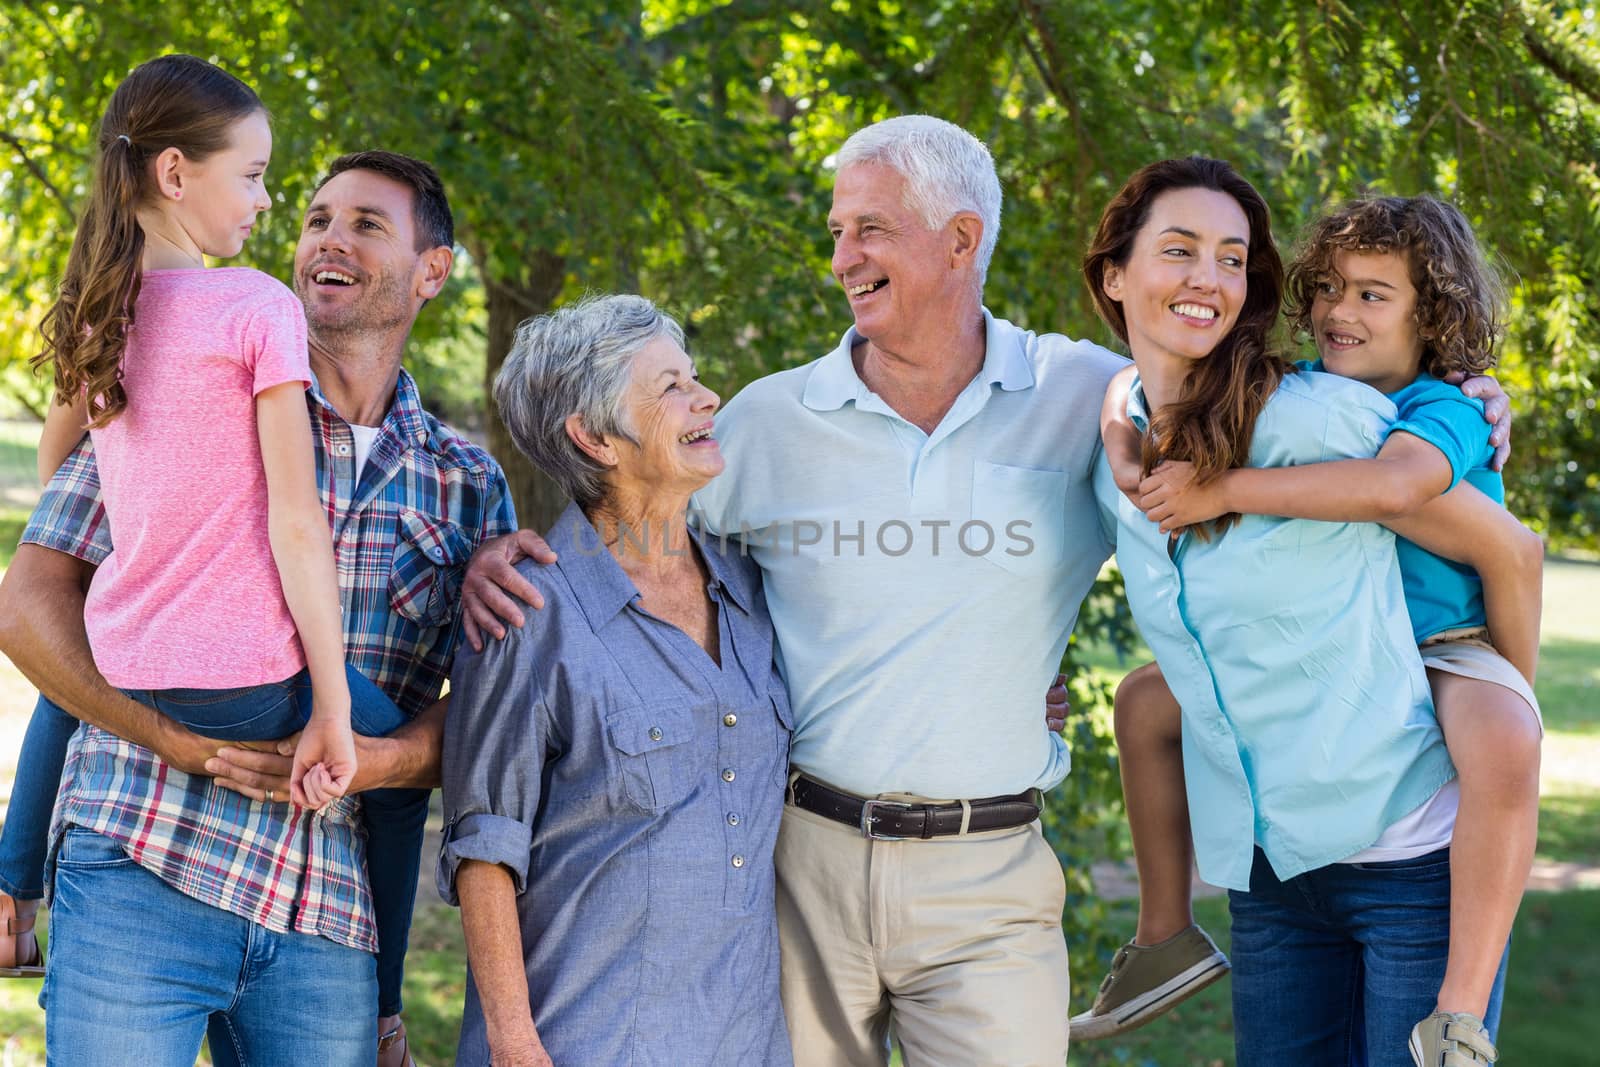 Extended family smiling in the park on a sunny day